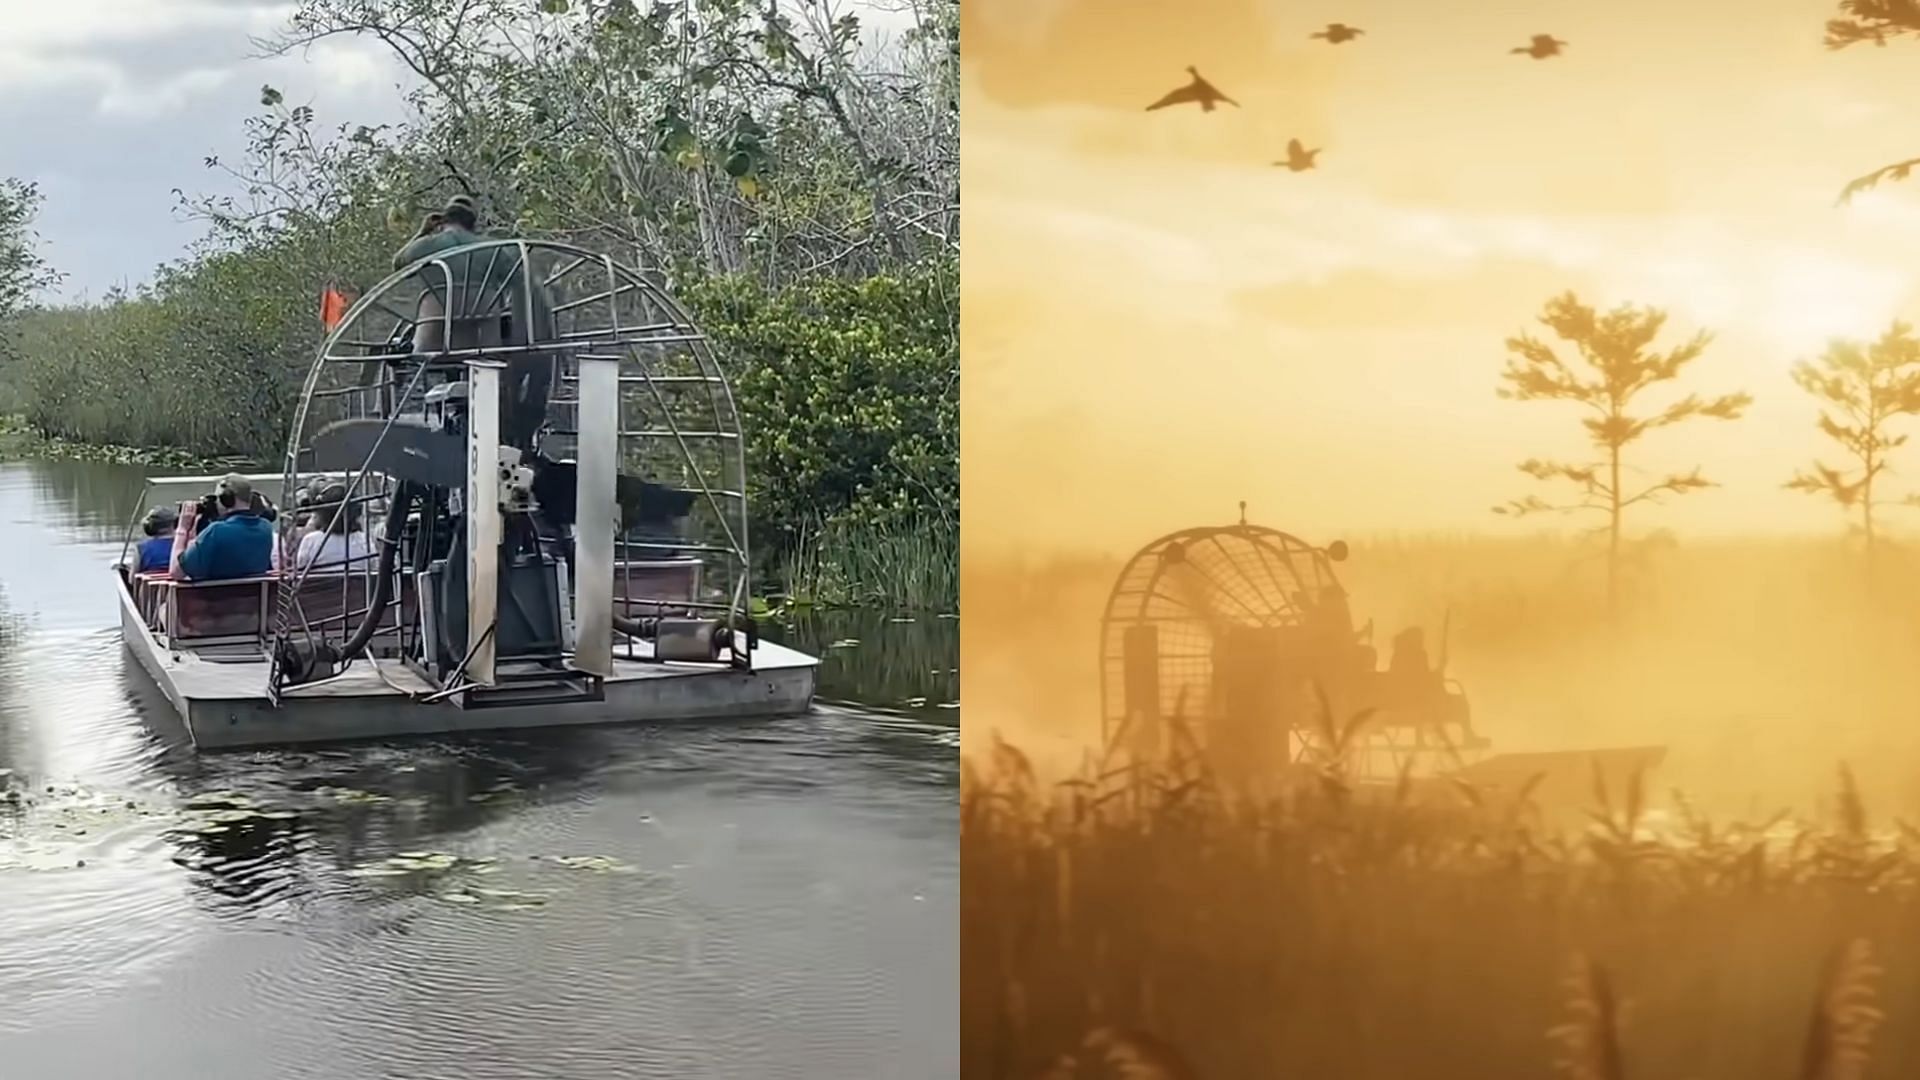 The Everglades, as seen in the trailer. (Images via YouTube/@JoelFrancoVlogs, Rockstar Games)